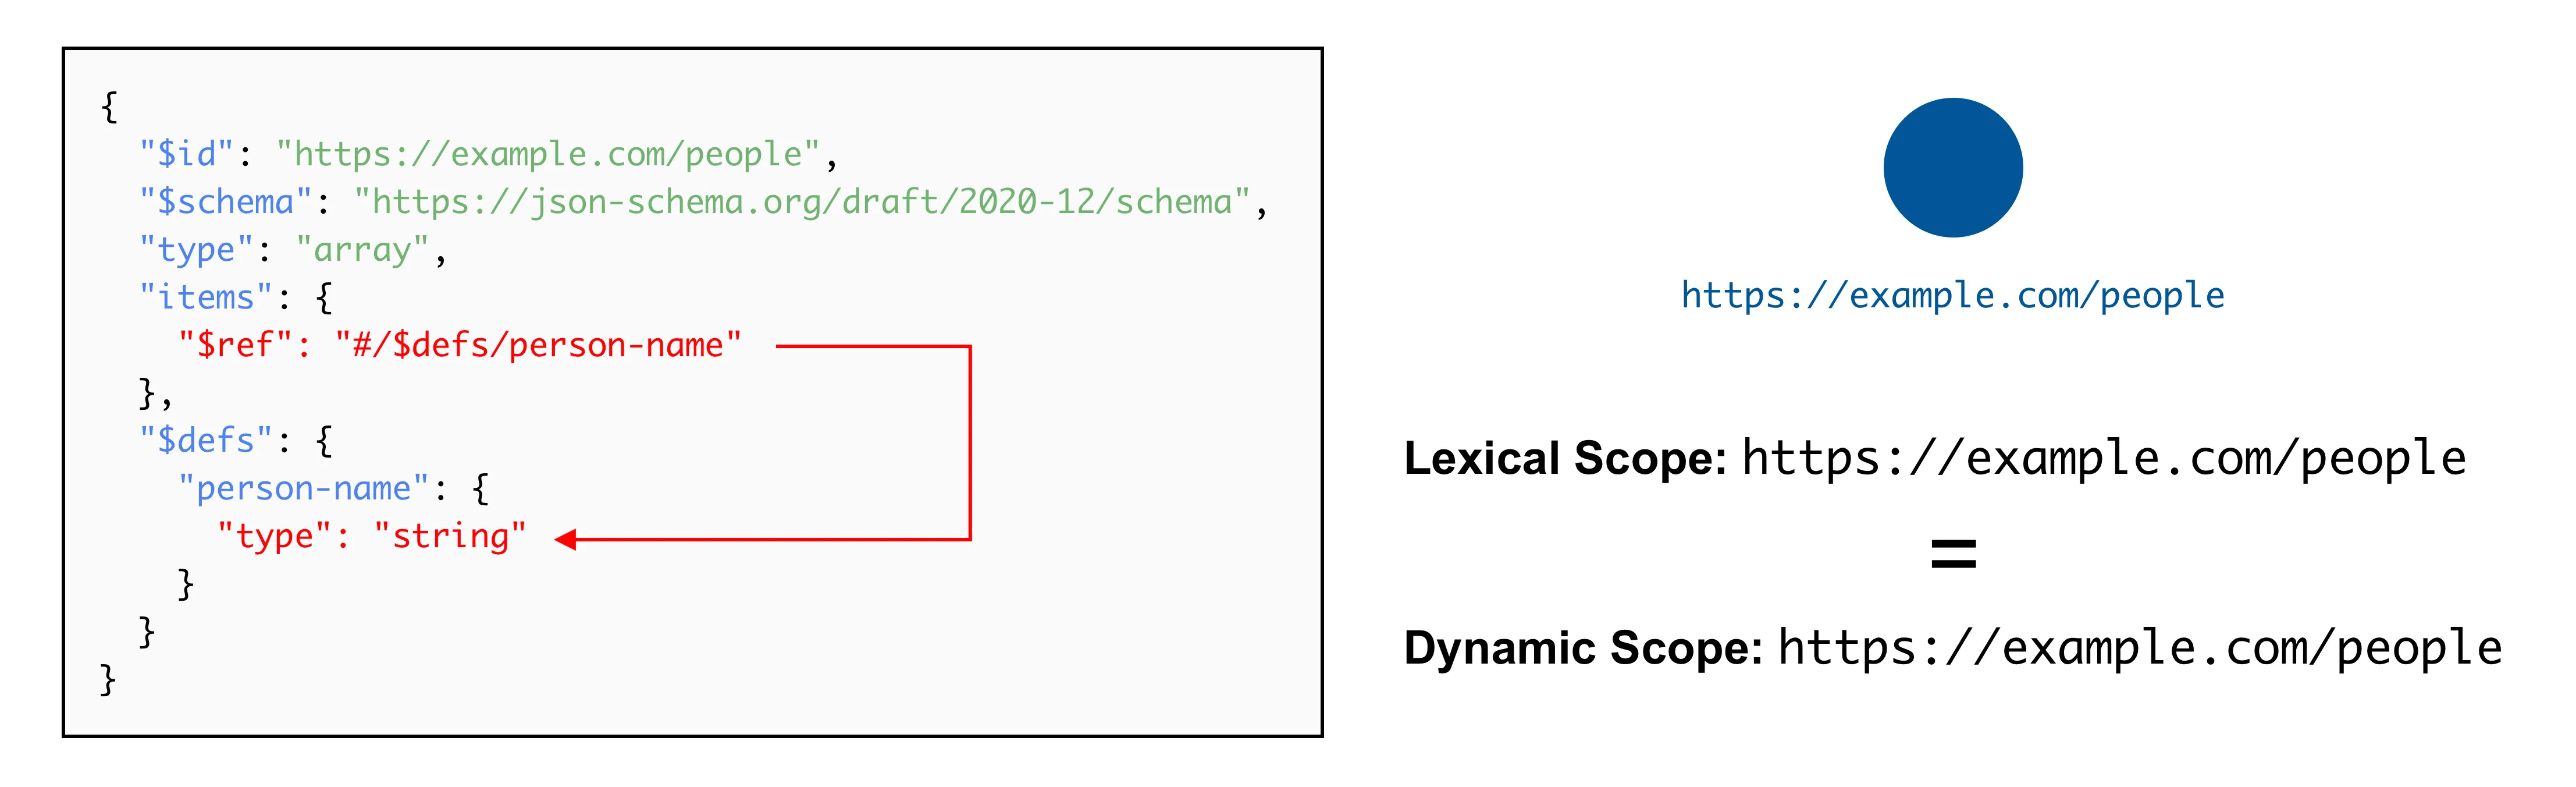 Dynamic scope and lexical scopes sometimes align